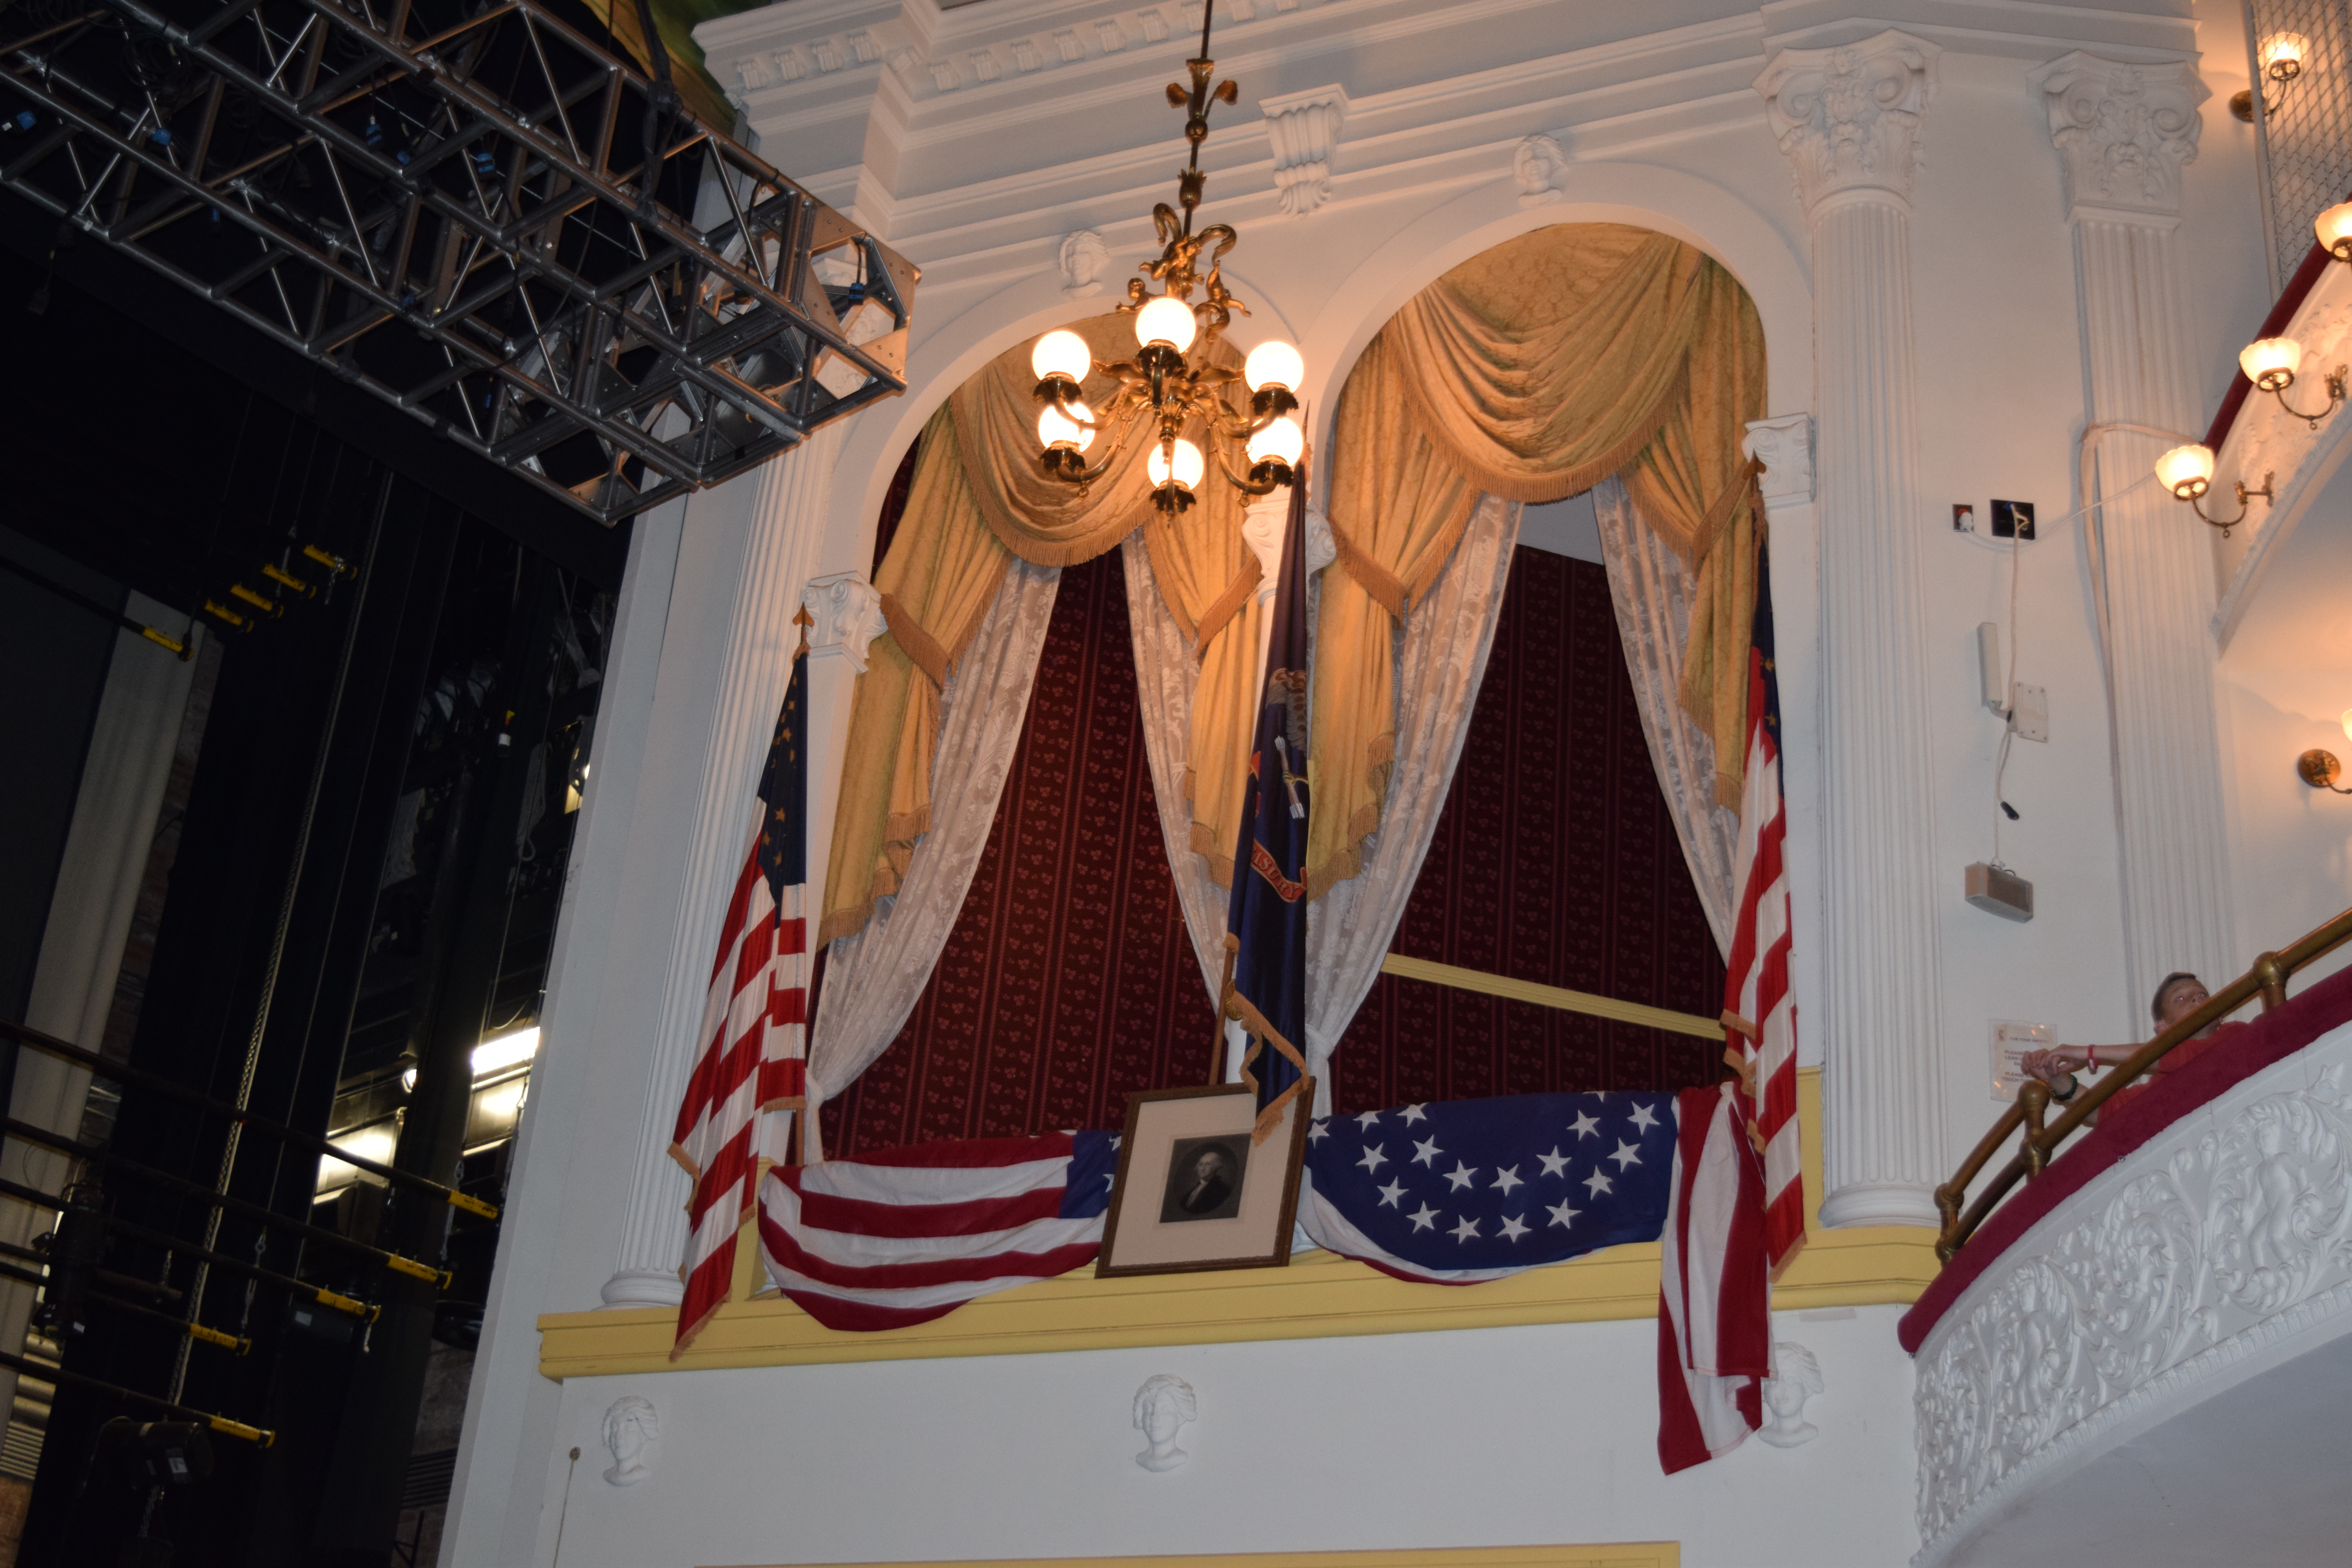 Presiden'ts Box Ford's Theater